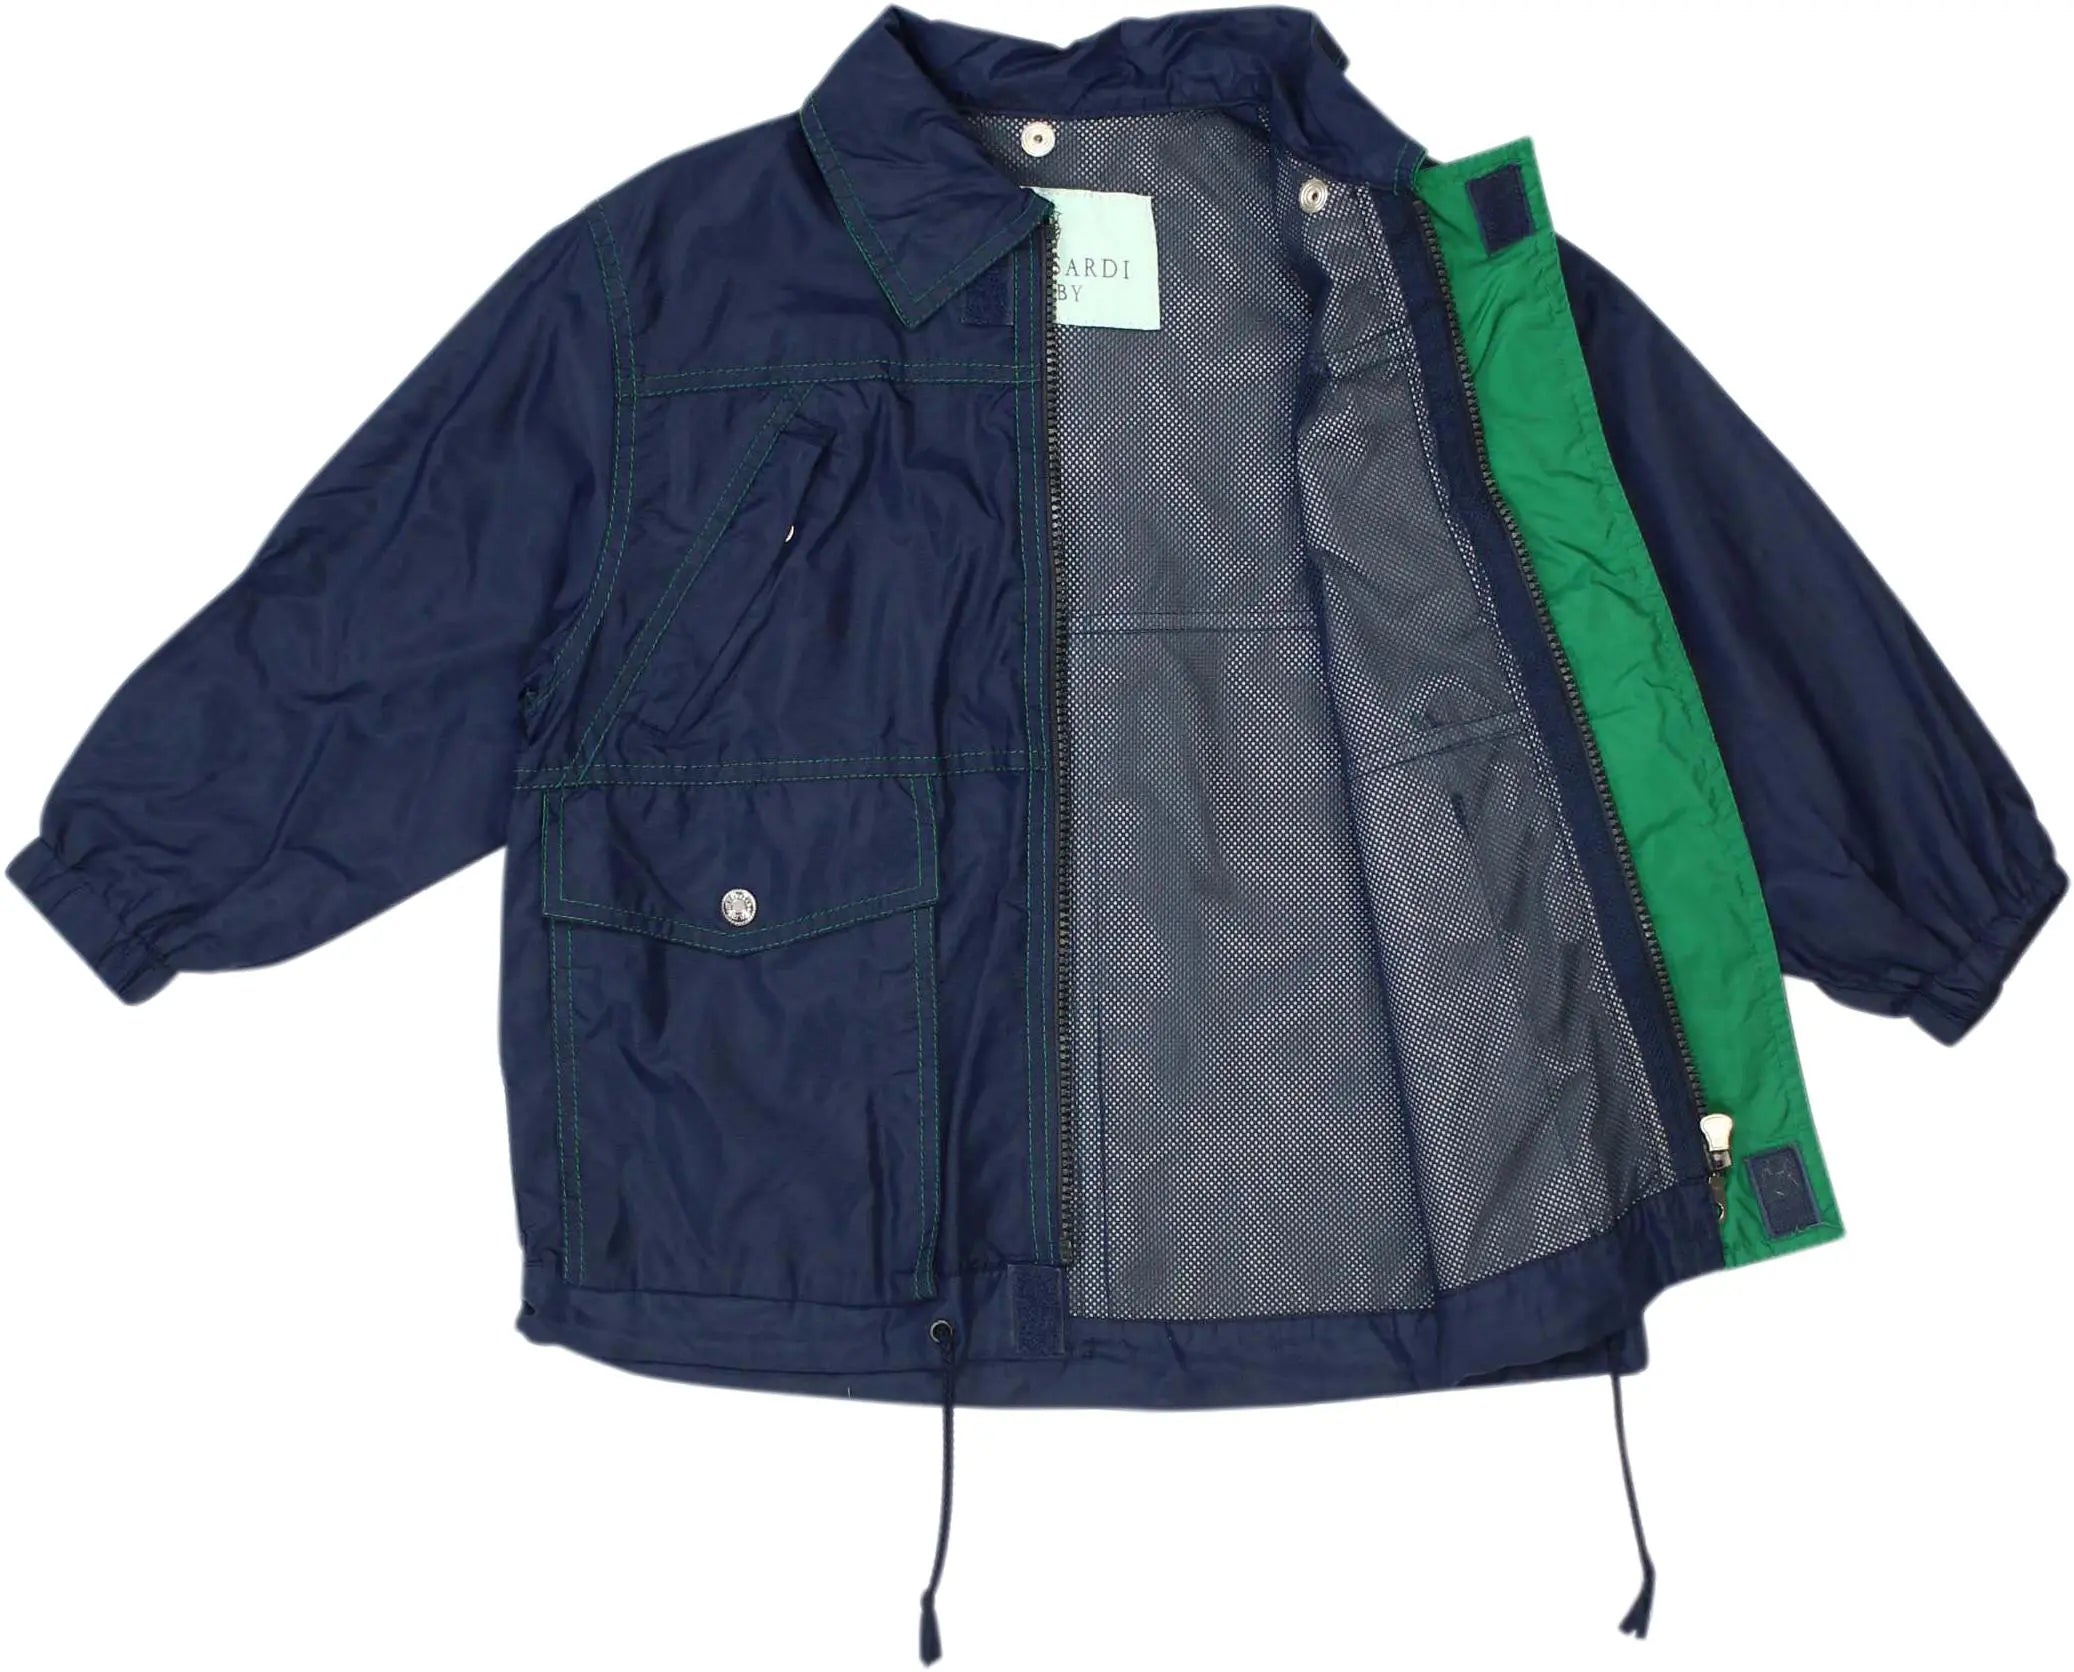 Trussardi - Blue Rain Jacket by Trussardi- ThriftTale.com - Vintage and second handclothing